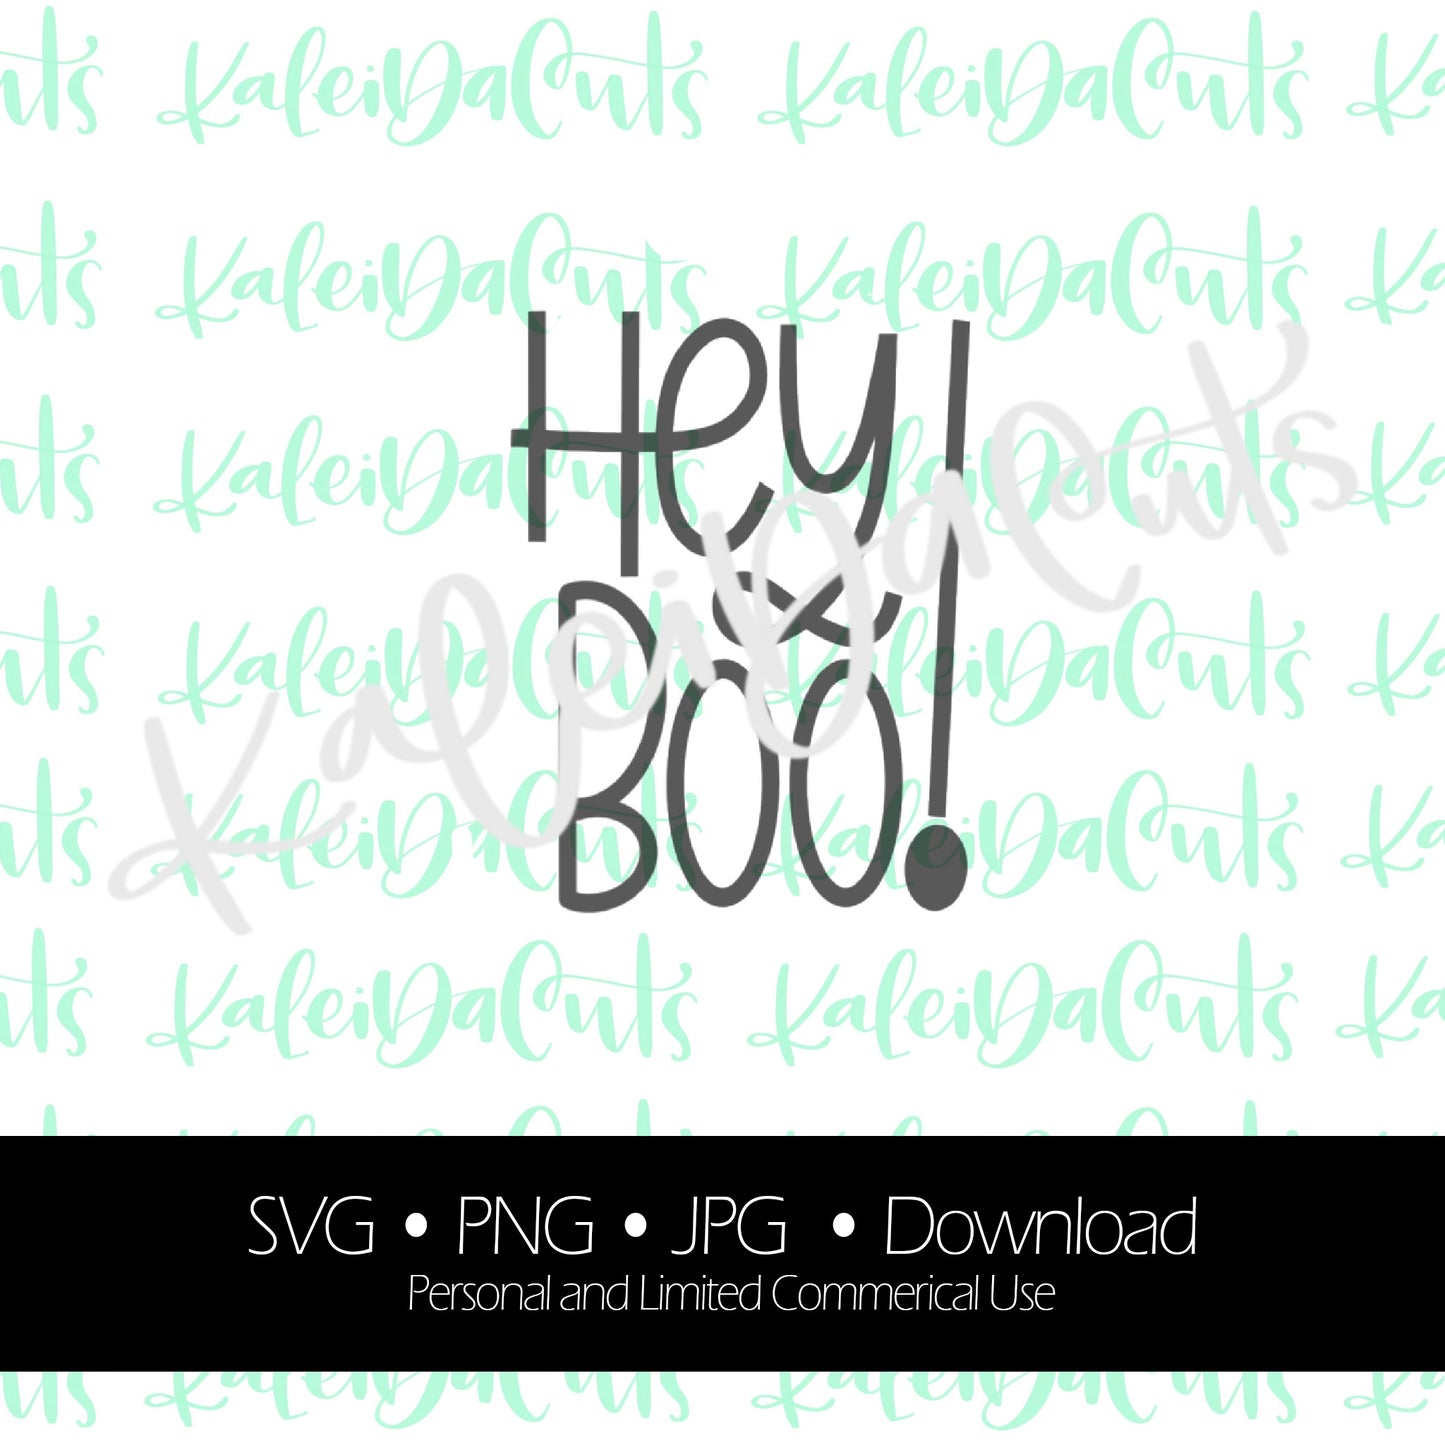 Hey Boo Lettering - Digital Download.